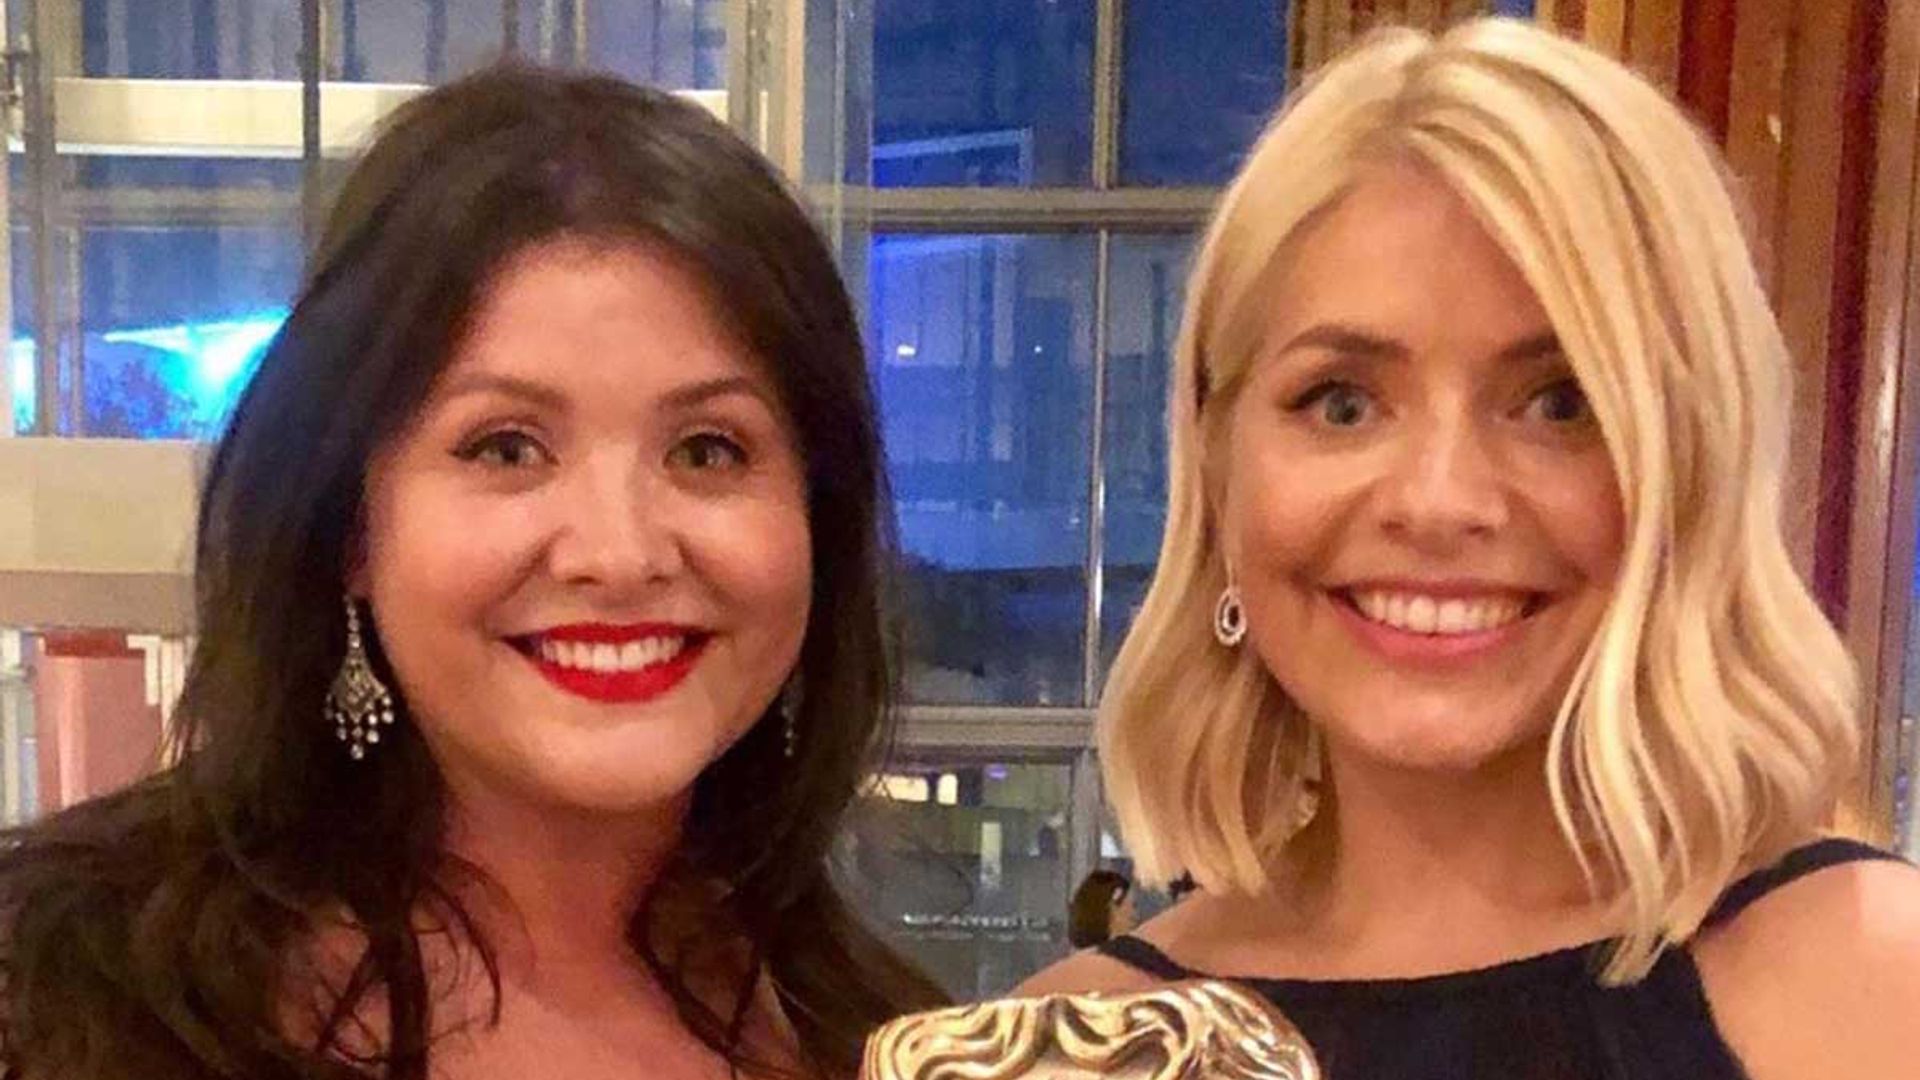 Holly Willoughby paid an emotional tribute with her 40th birthday dress